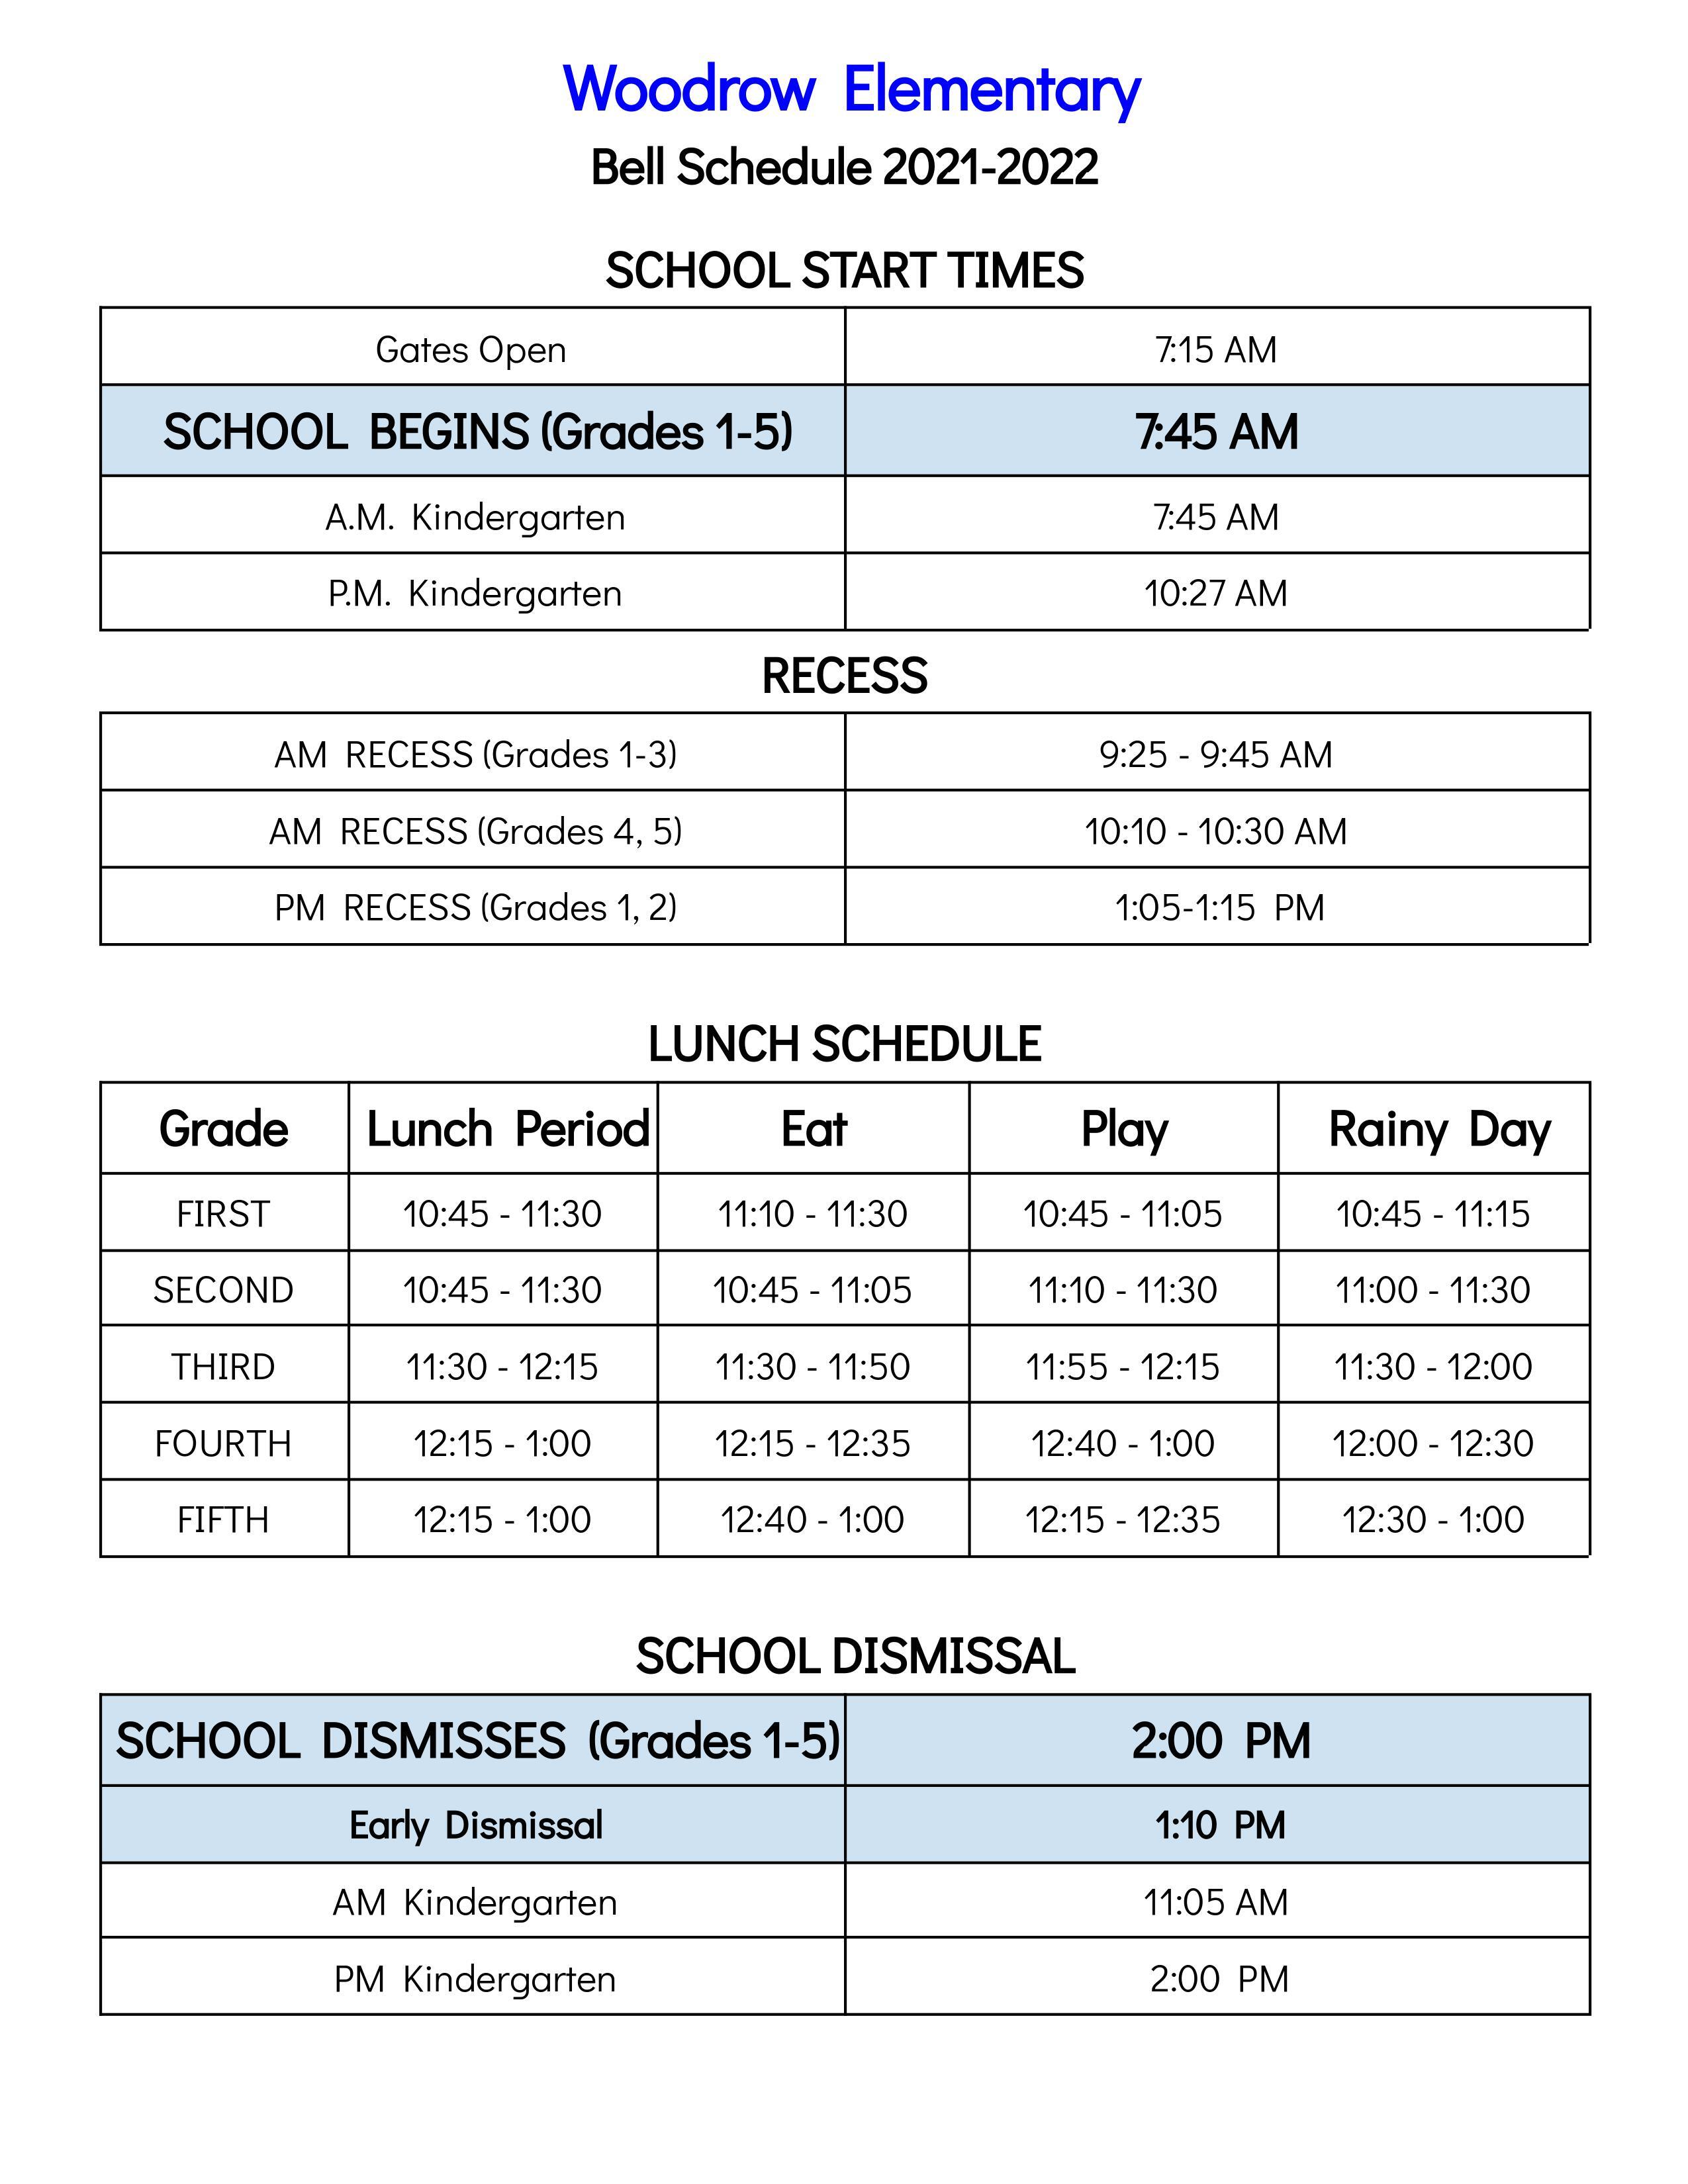 School Start Times, Recess, Lunch Schedule, and School Dismissal times